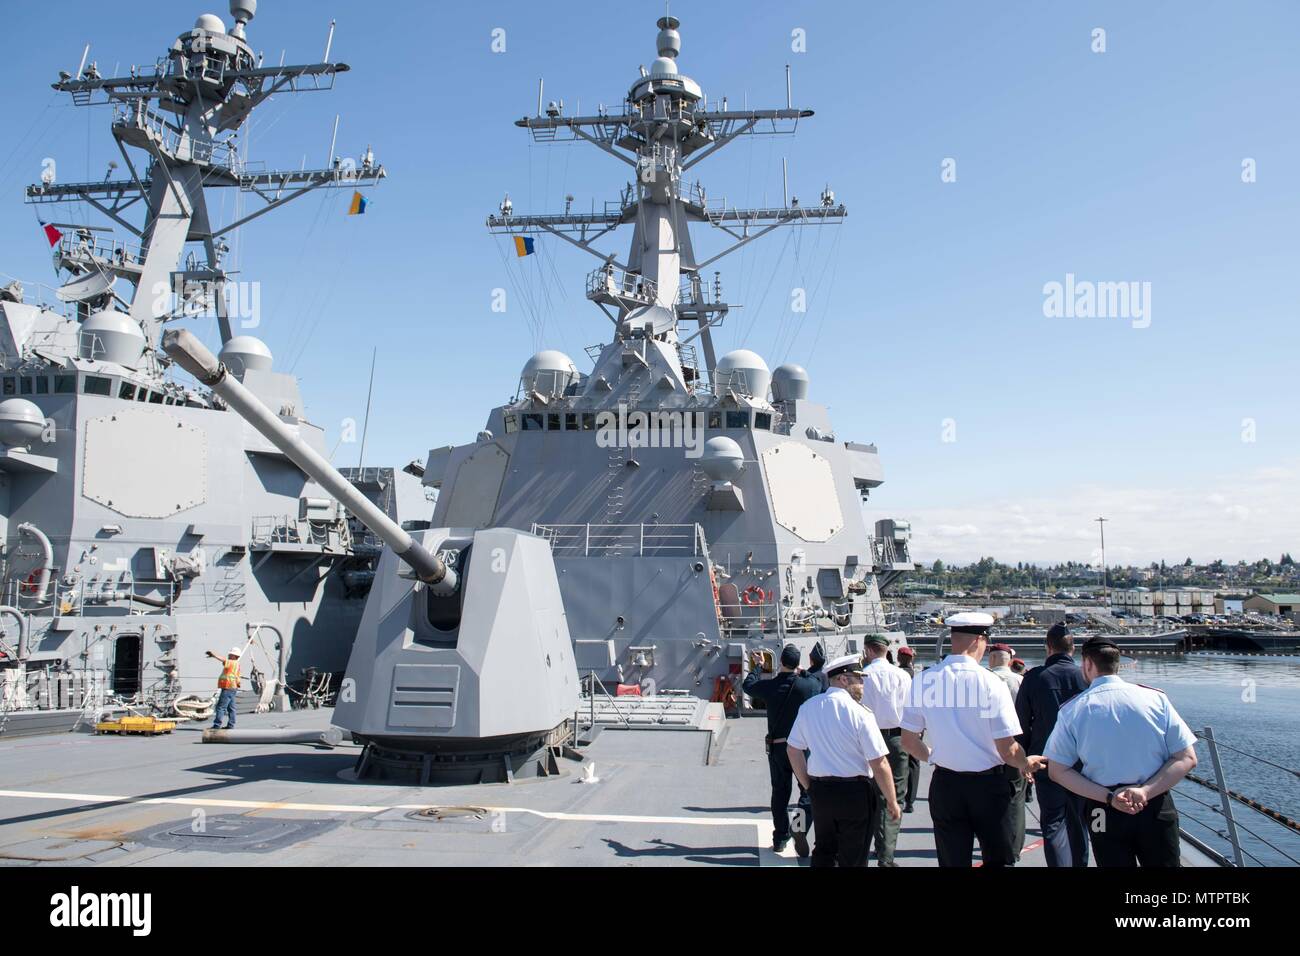 180521-N-DA737-0087 Everett, Wash. (May 21, 2018) Officers assigned to the Arleigh Burke-class guided-missile destroyer USS Gridley (DDG 101) give visiting German officers enrolled in the International General/Admiral Staff Officer Course (IGASOC) a tour of their ship. The tour is part of a visit by IGASOC students to Naval Station Everett. (U.S. Navy photo by Mass Communication Specialist 2nd Class Jonathan Jiang/Released) Stock Photo